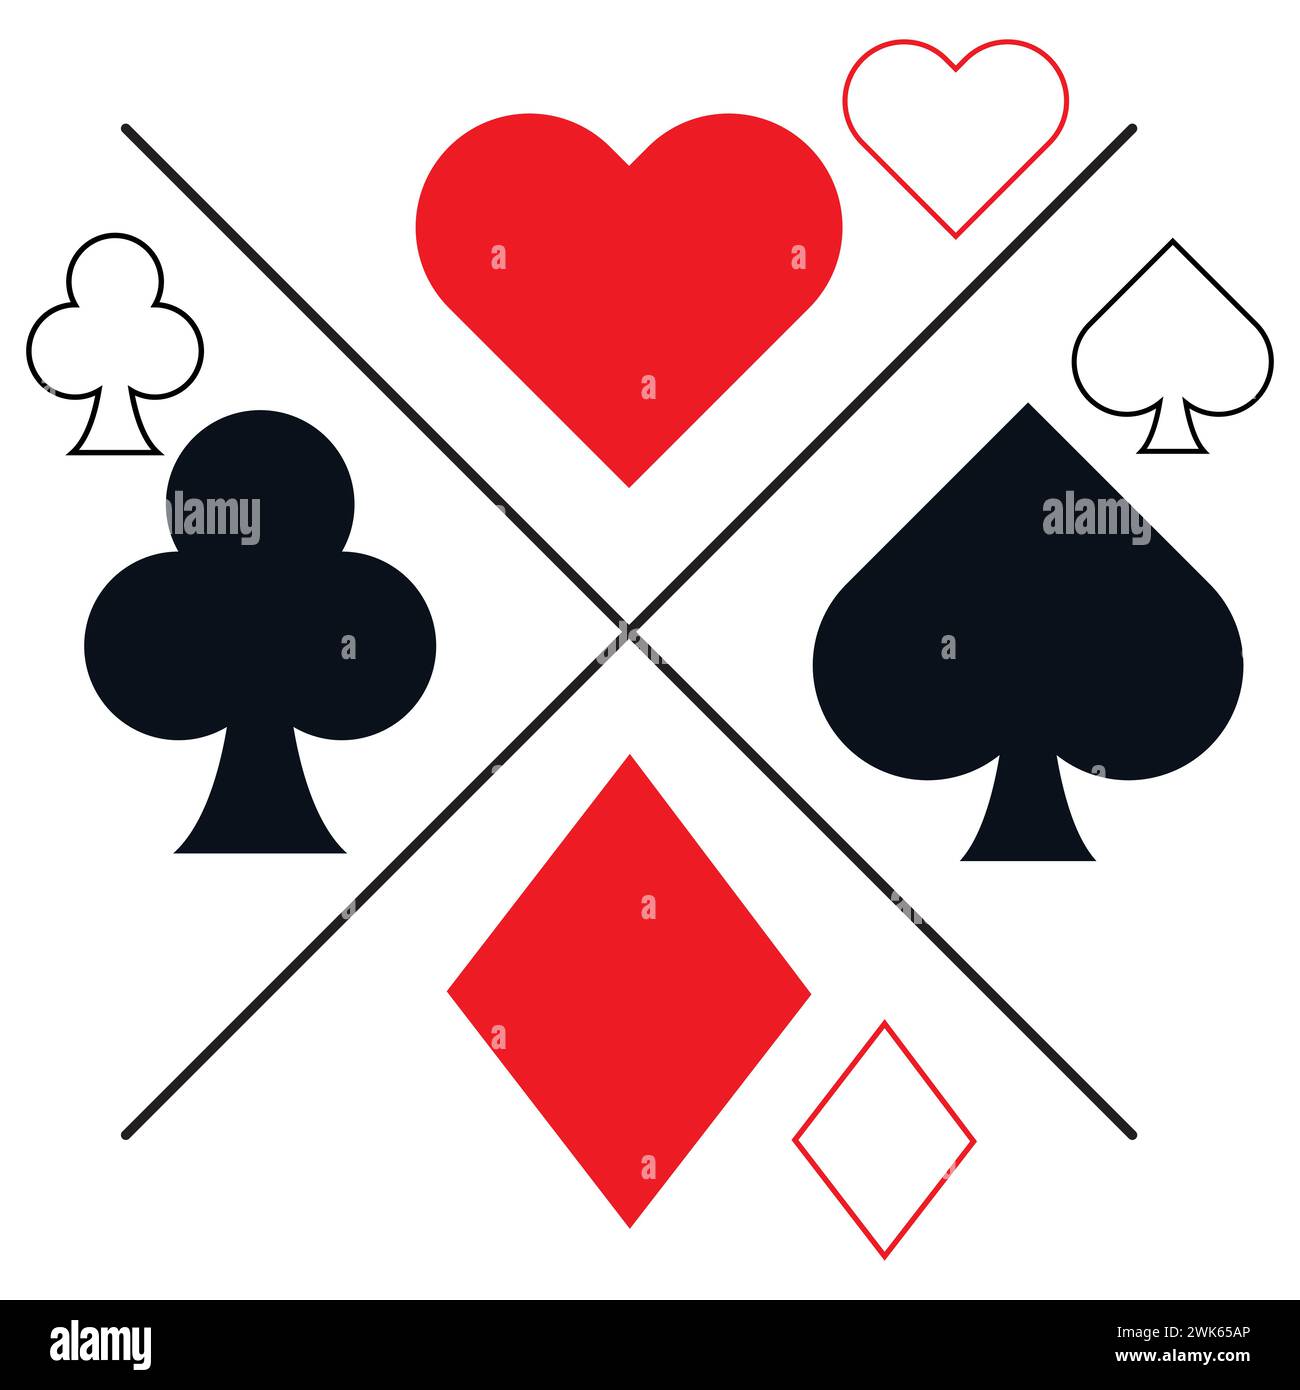 Poker playing cards suit set vector symbols illustration. Stock Vector